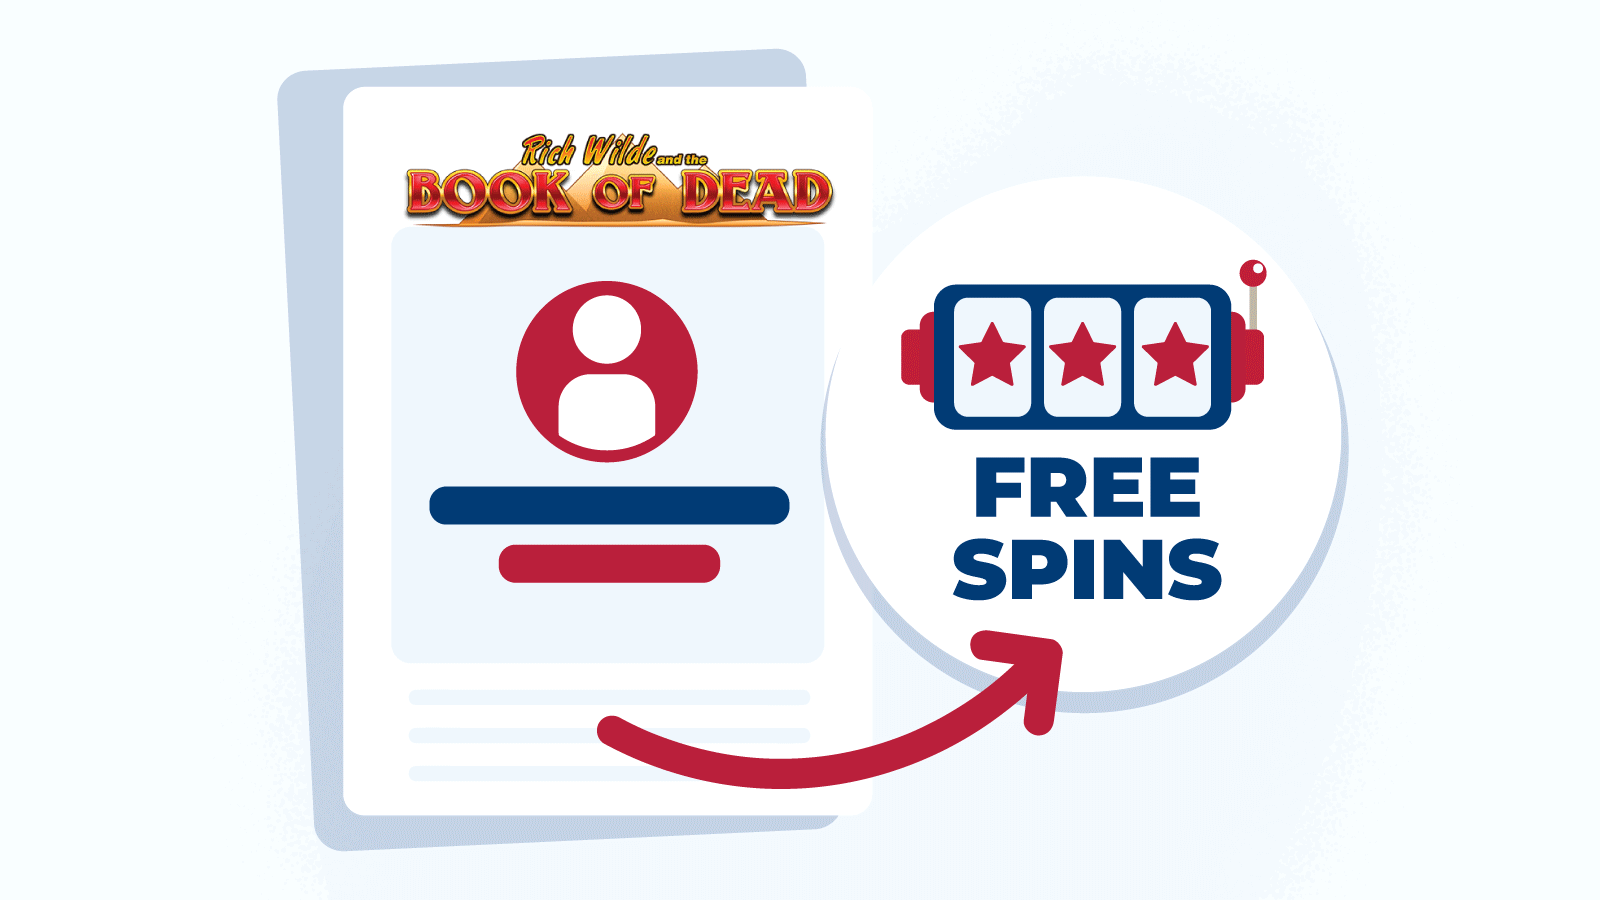 How to claim free spins Book of Dead on registration